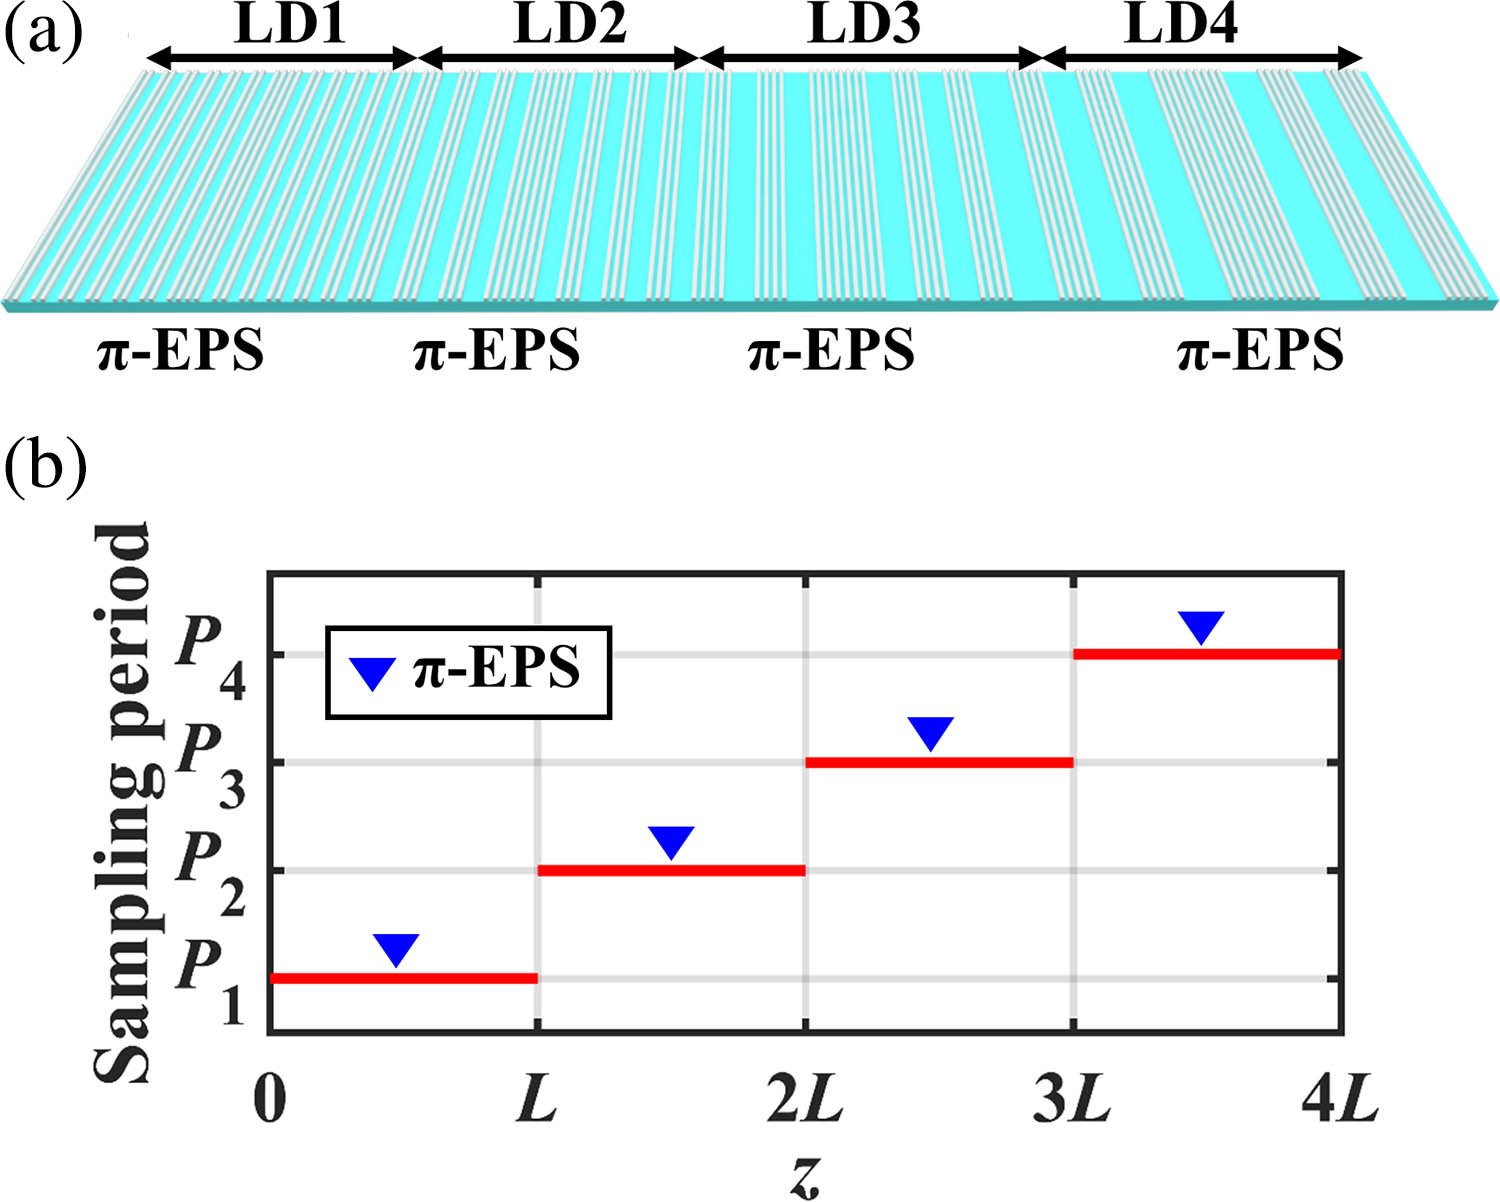 (a) Schematic of the grating designed by the REC technique and (b) sampling periods of the four in-series lasers (π-EPS: equivalent π phase shift).